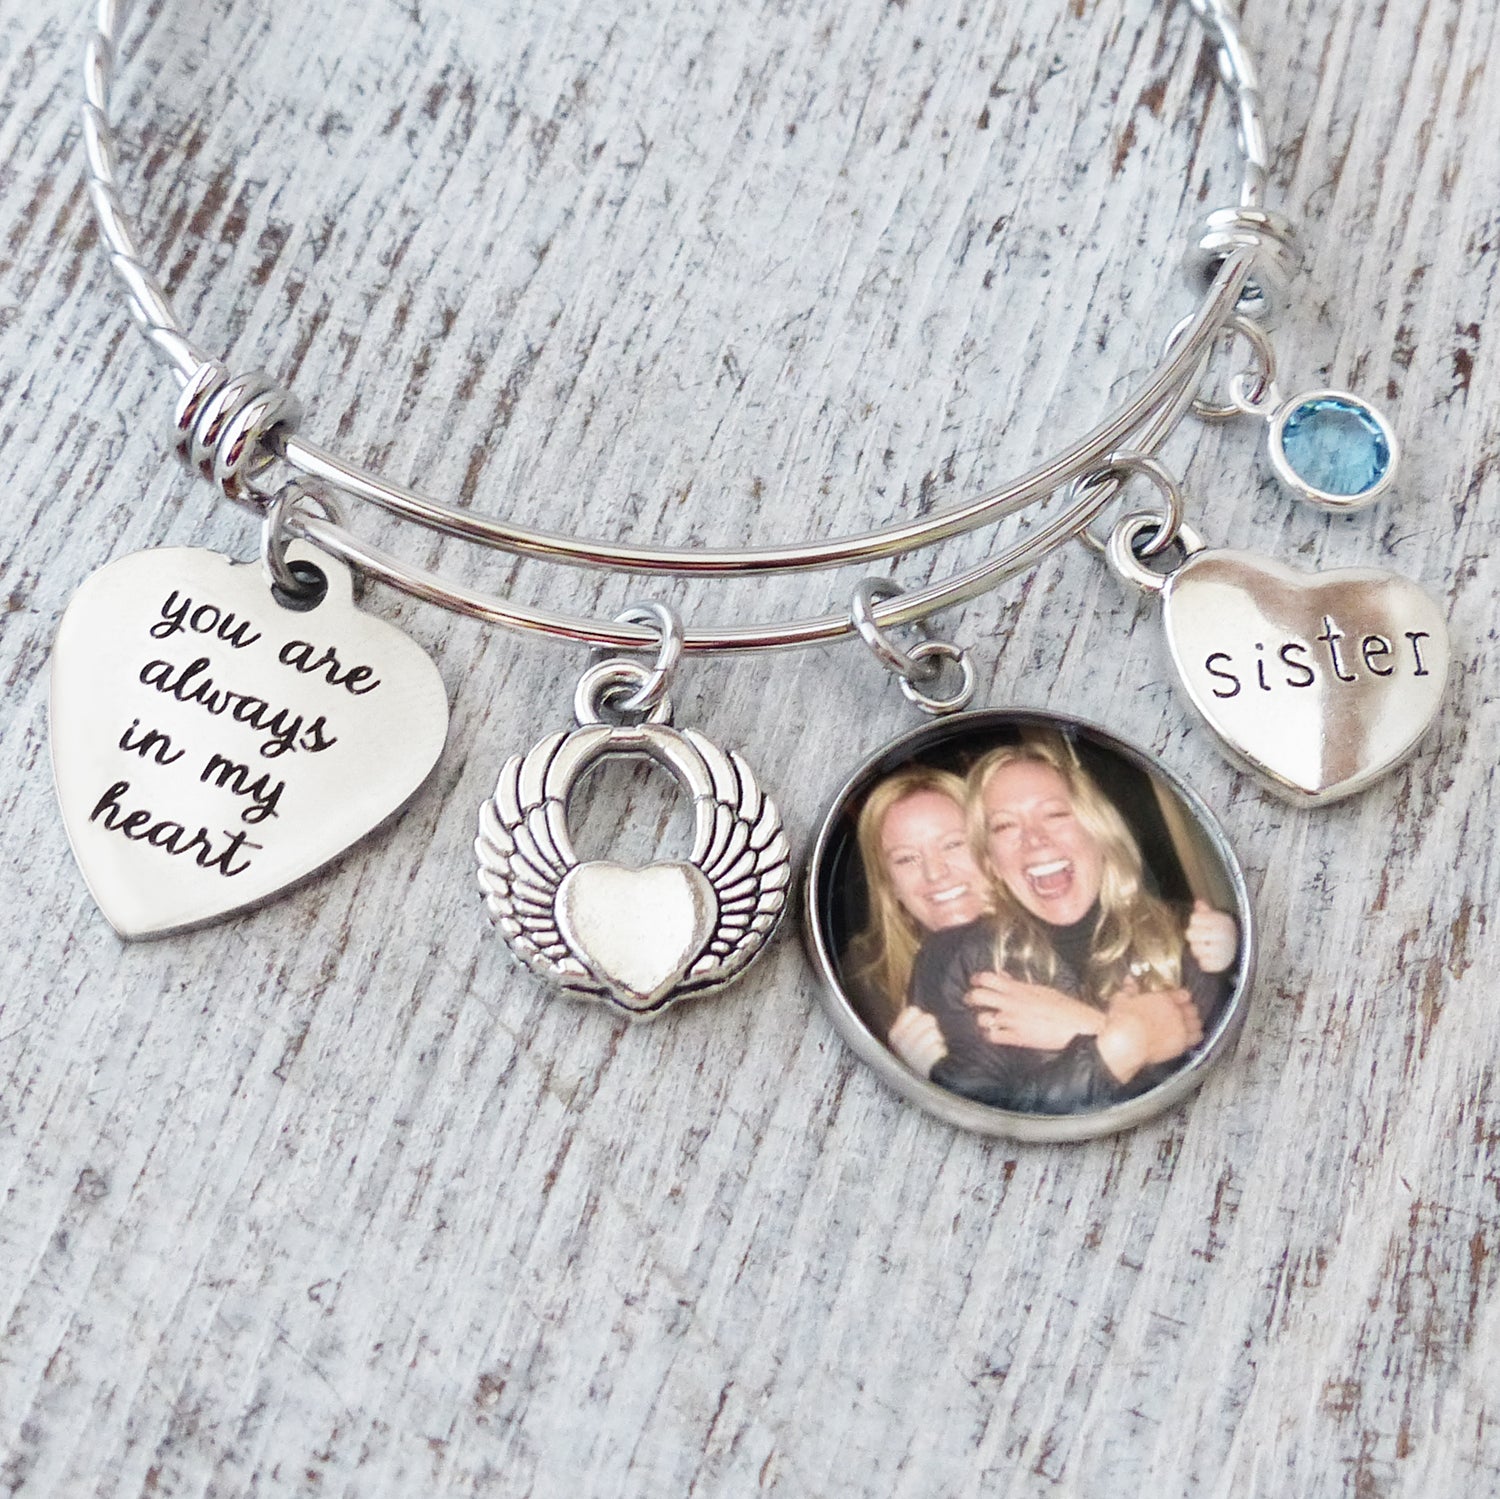 loss of sister bereavement bagel bracelet you are always in my heart with small custom photo pendant an angel wing charm, sister charm and 1 birthstone